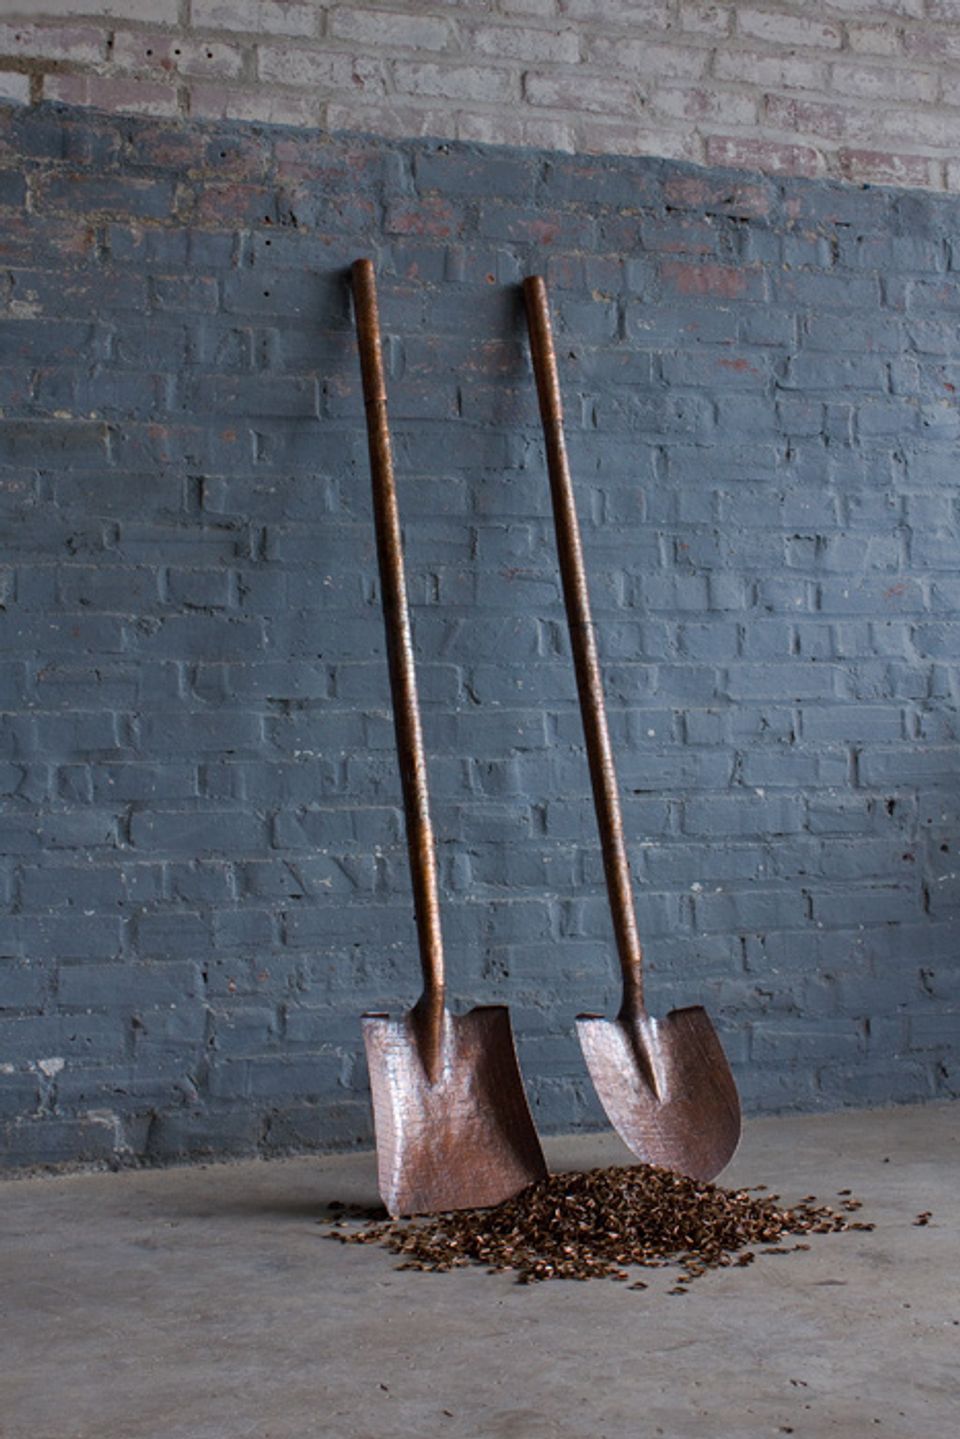 Stacey Lee Webber's The Craftsmen Series: Shovels for 40 Under 40 at the Renwick Gallery.